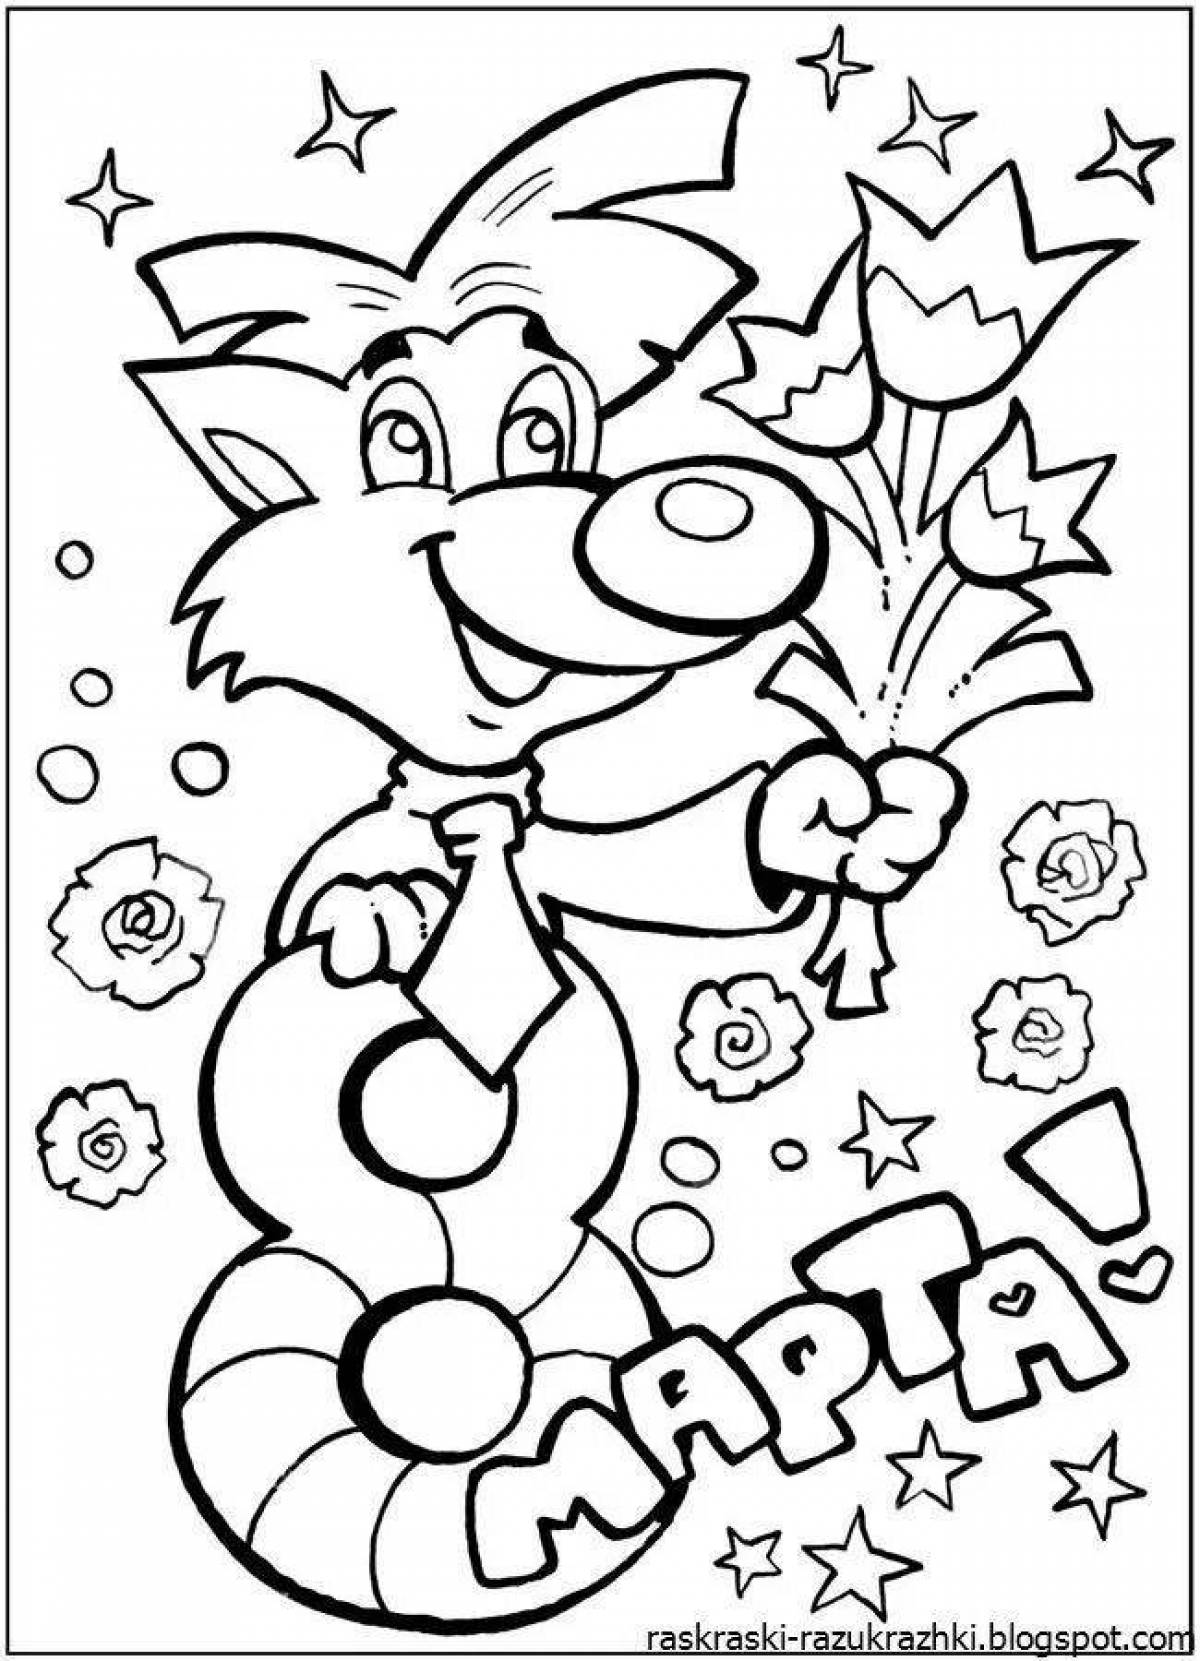 Color-frenzy 8 march coloring page